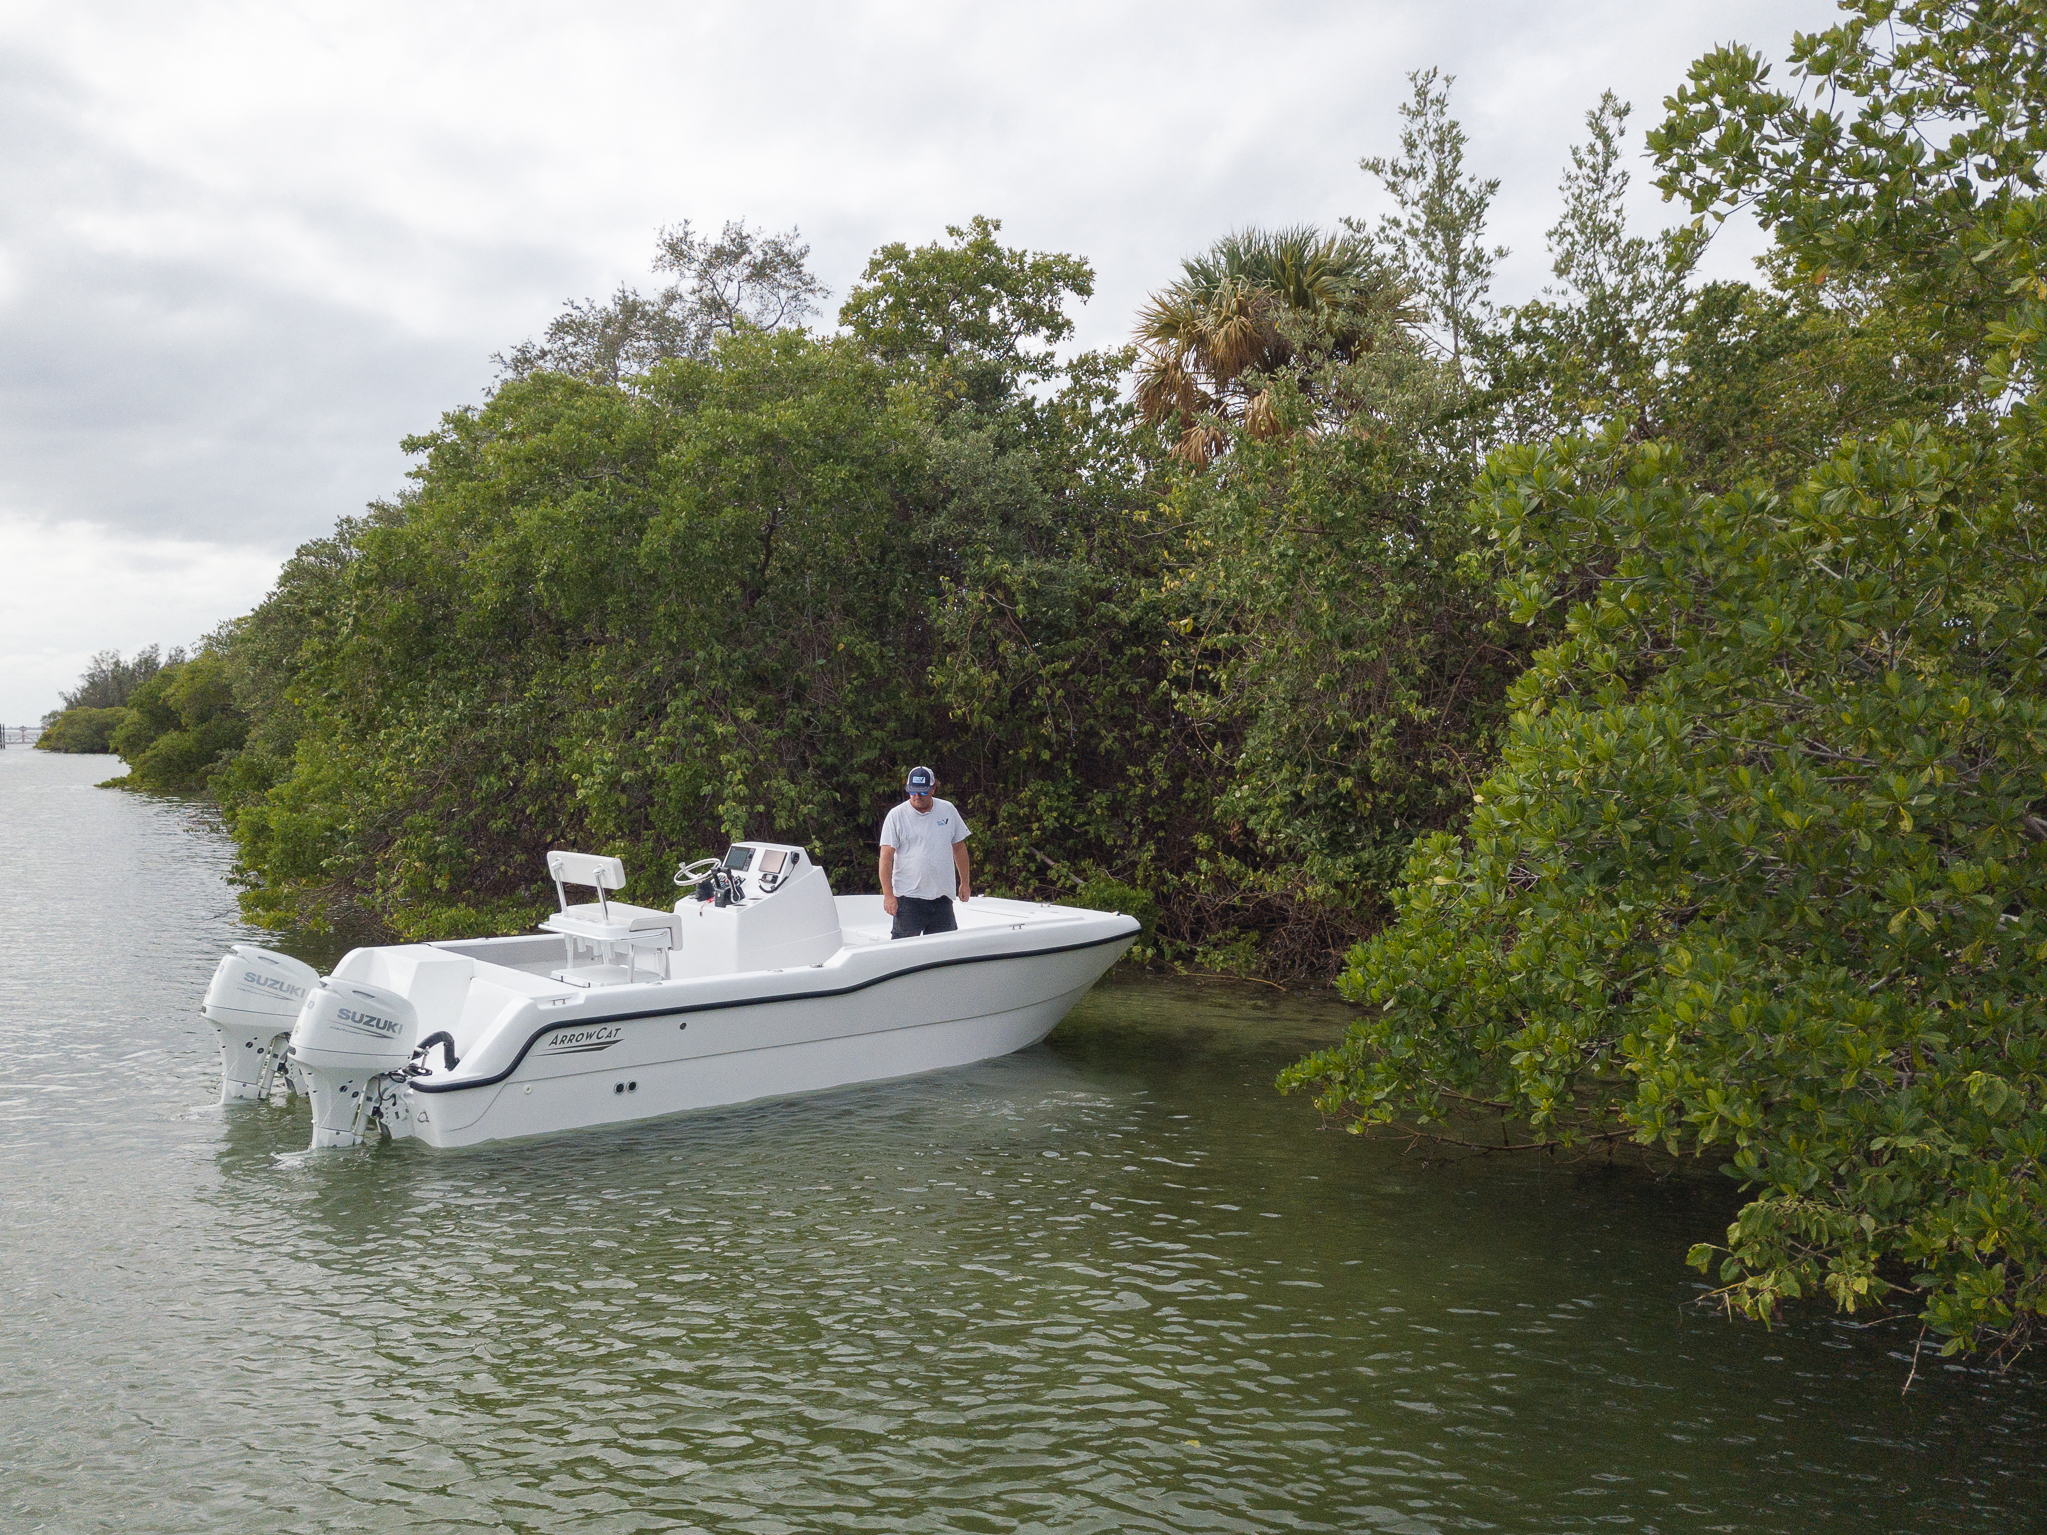 ArrowCat 20' center console powercat boat on the water in clearwater, Florida